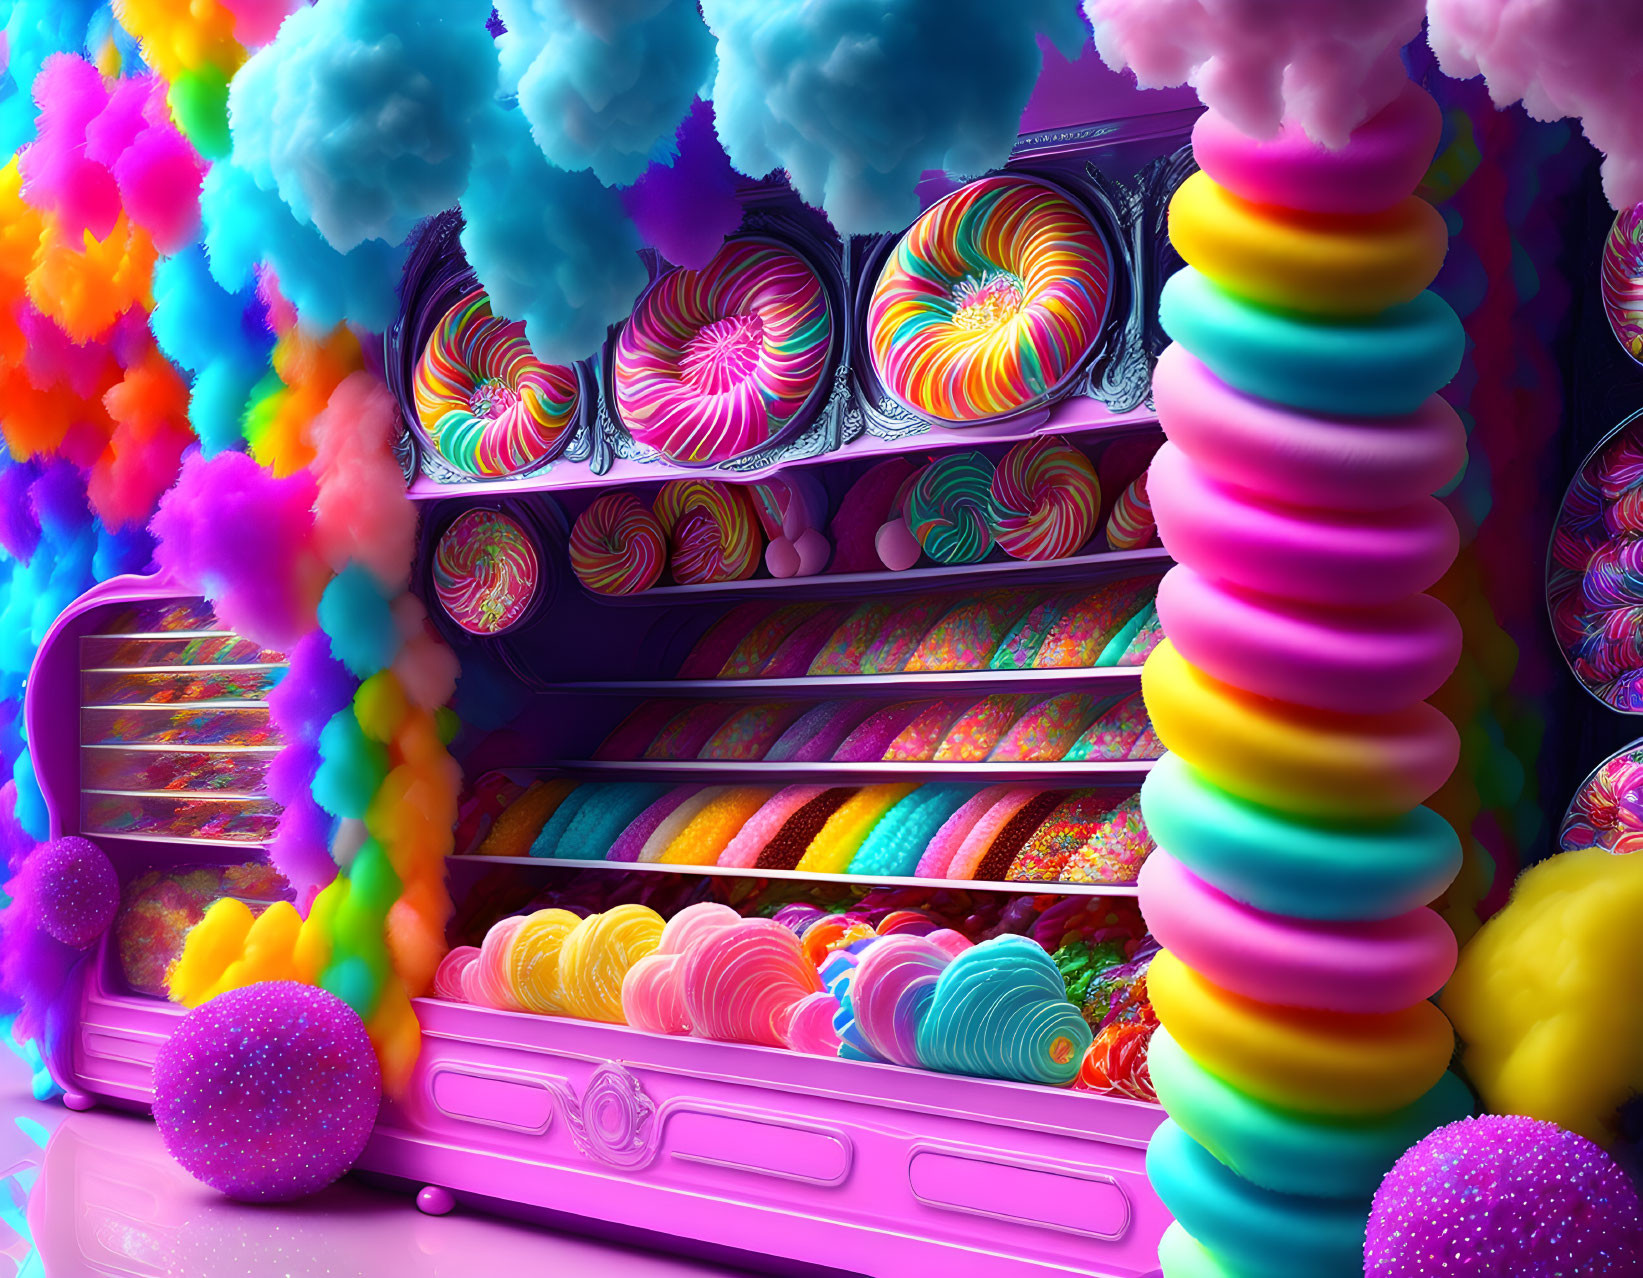 The wonderfull candy store of dreams.